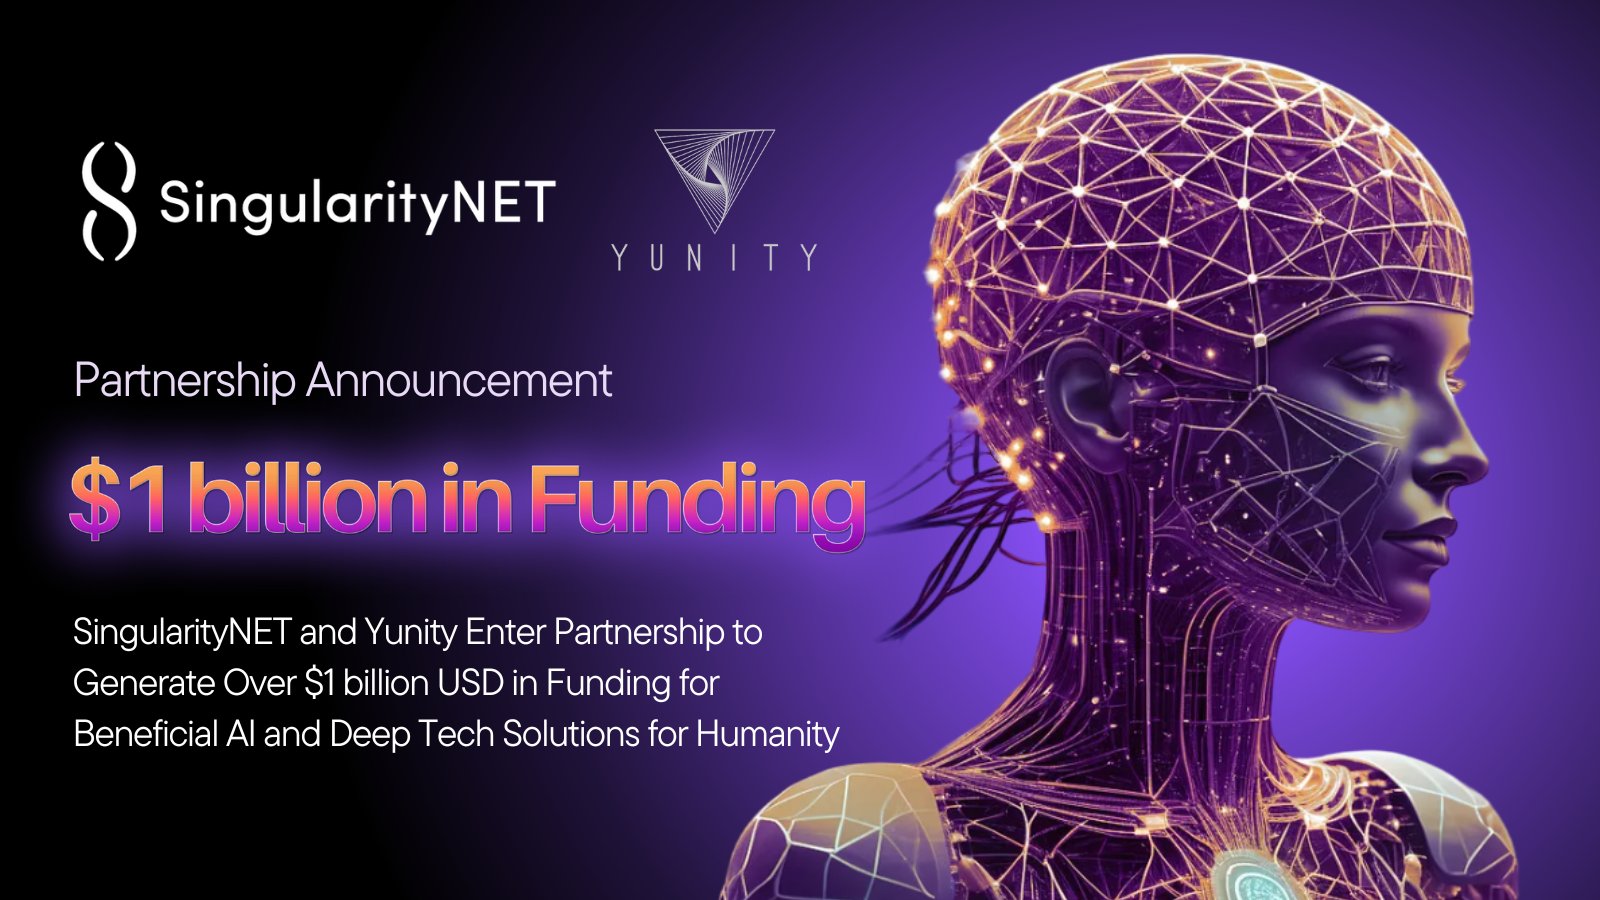 SingularityNET and Yunity Join Forces to Advance Beneficial AI & Deep Tech for Humanity